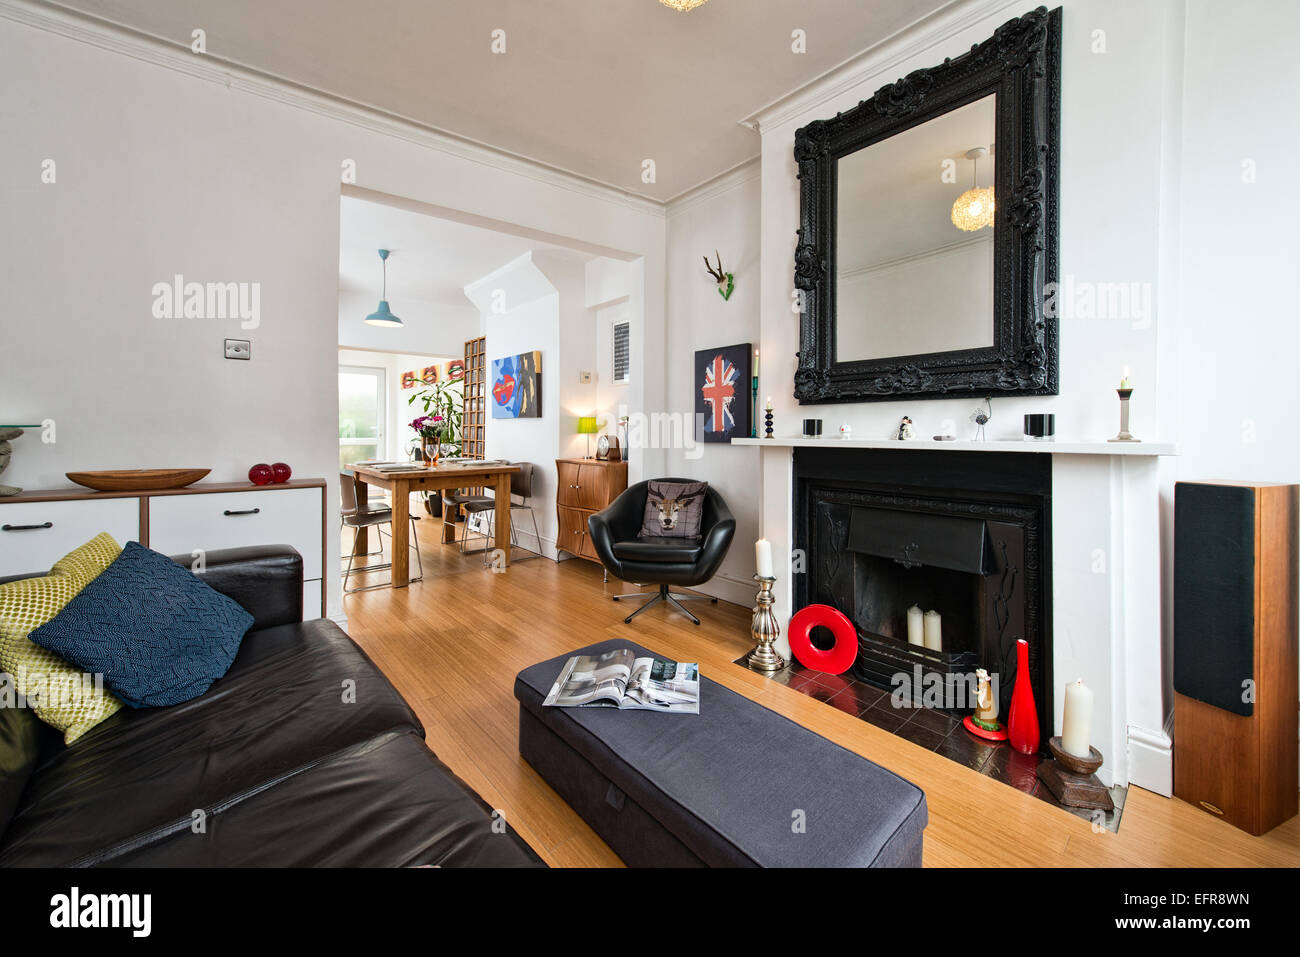 The interior of a modernised, typical British Victorian terraced home in Swindon, Wiltshire, UK Stock Photo